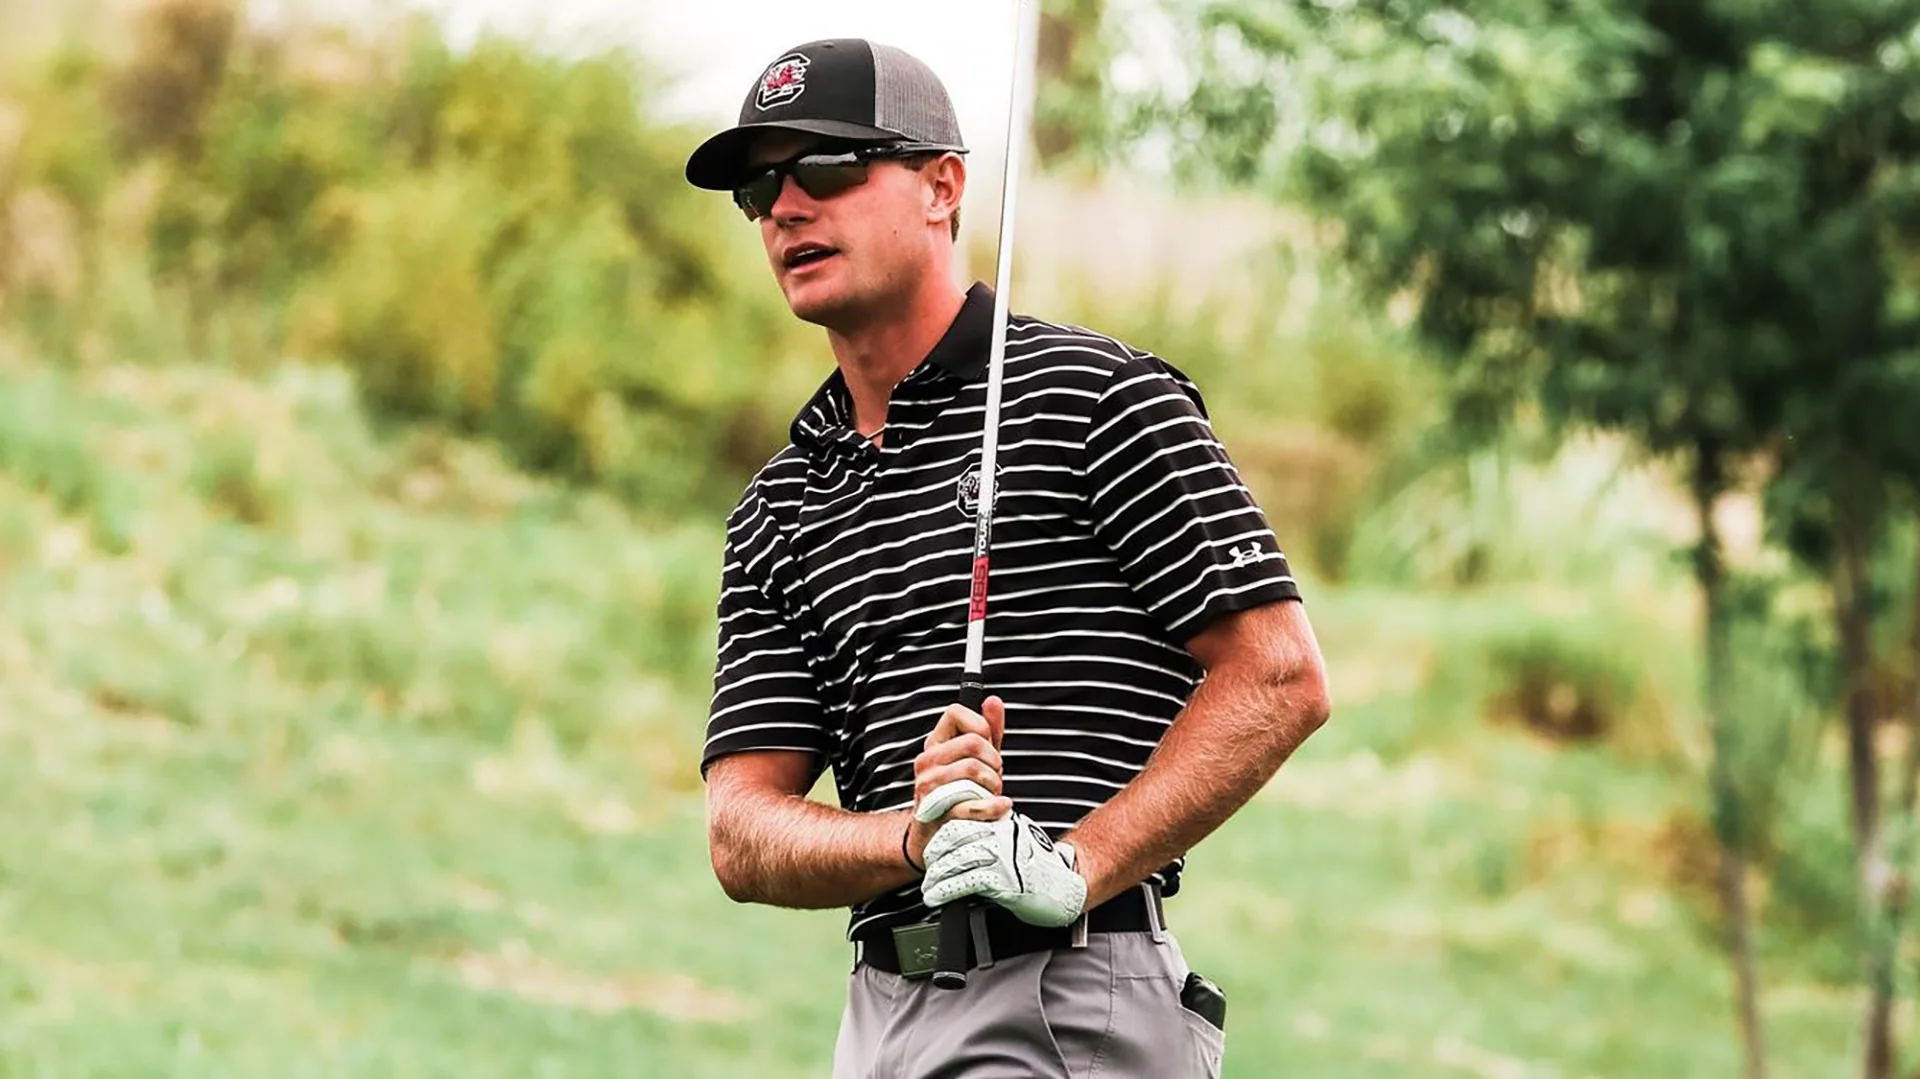 South Carolina’s Ryan Hall savors rise to becoming one of college golf’s best